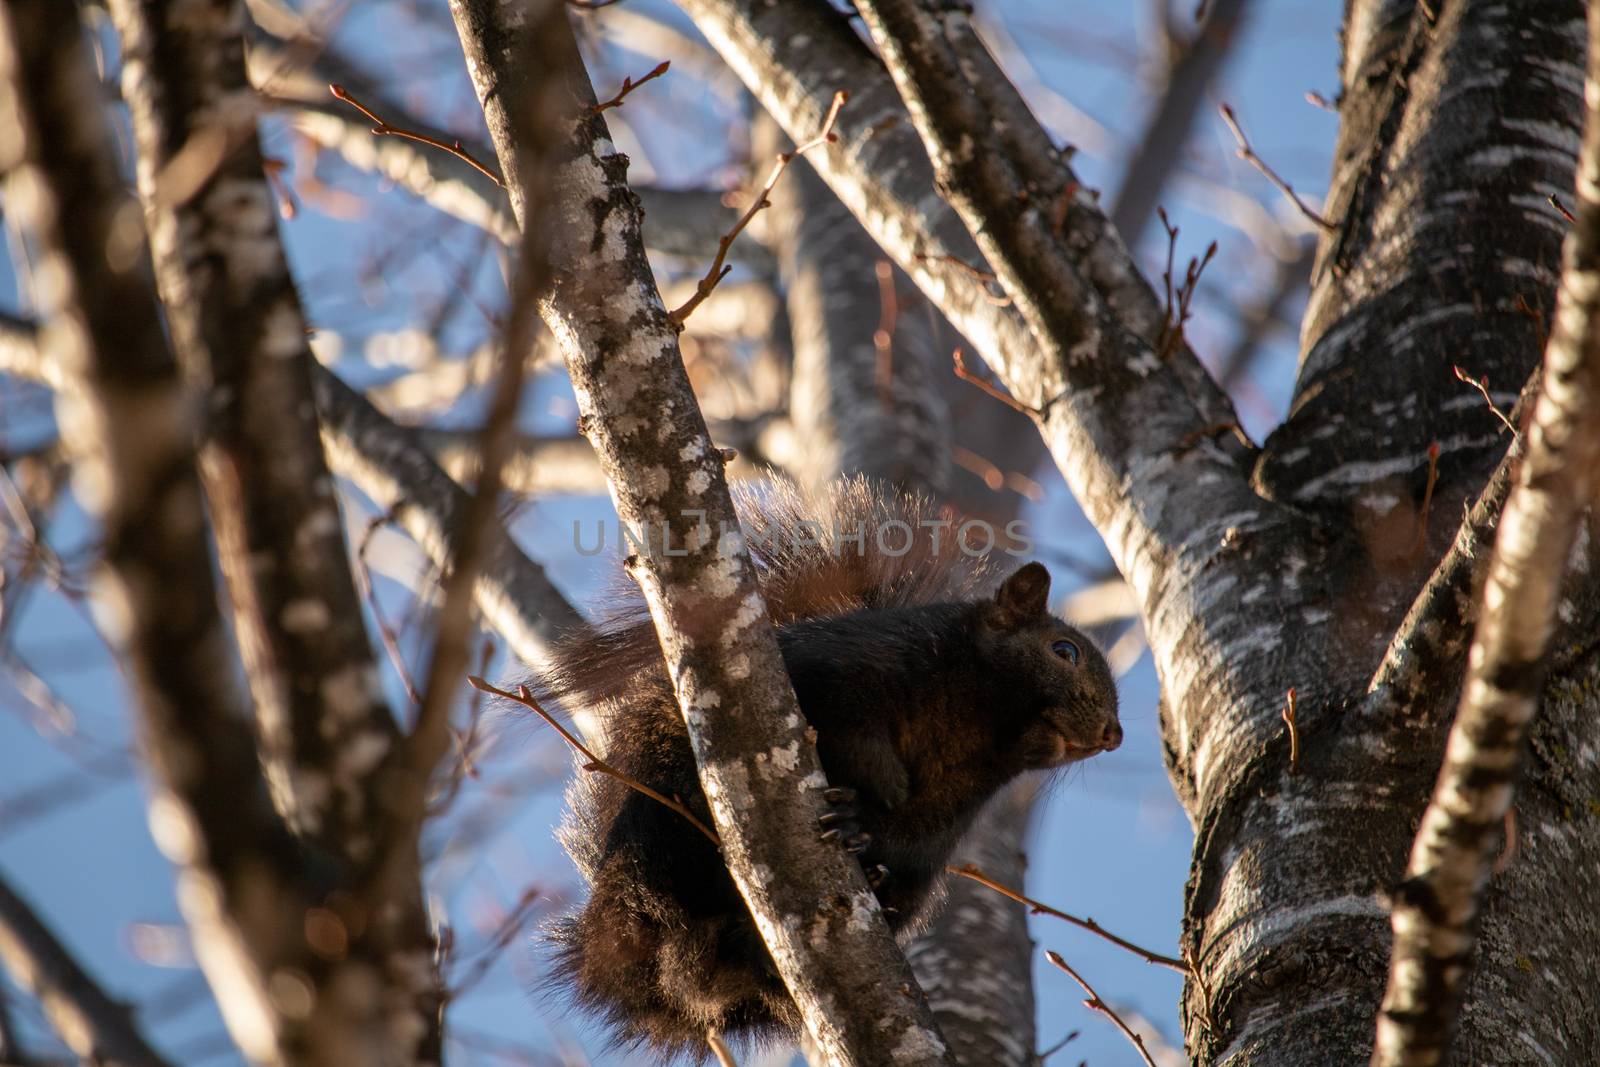 A black squirrel waits on a tree branch by colintemple